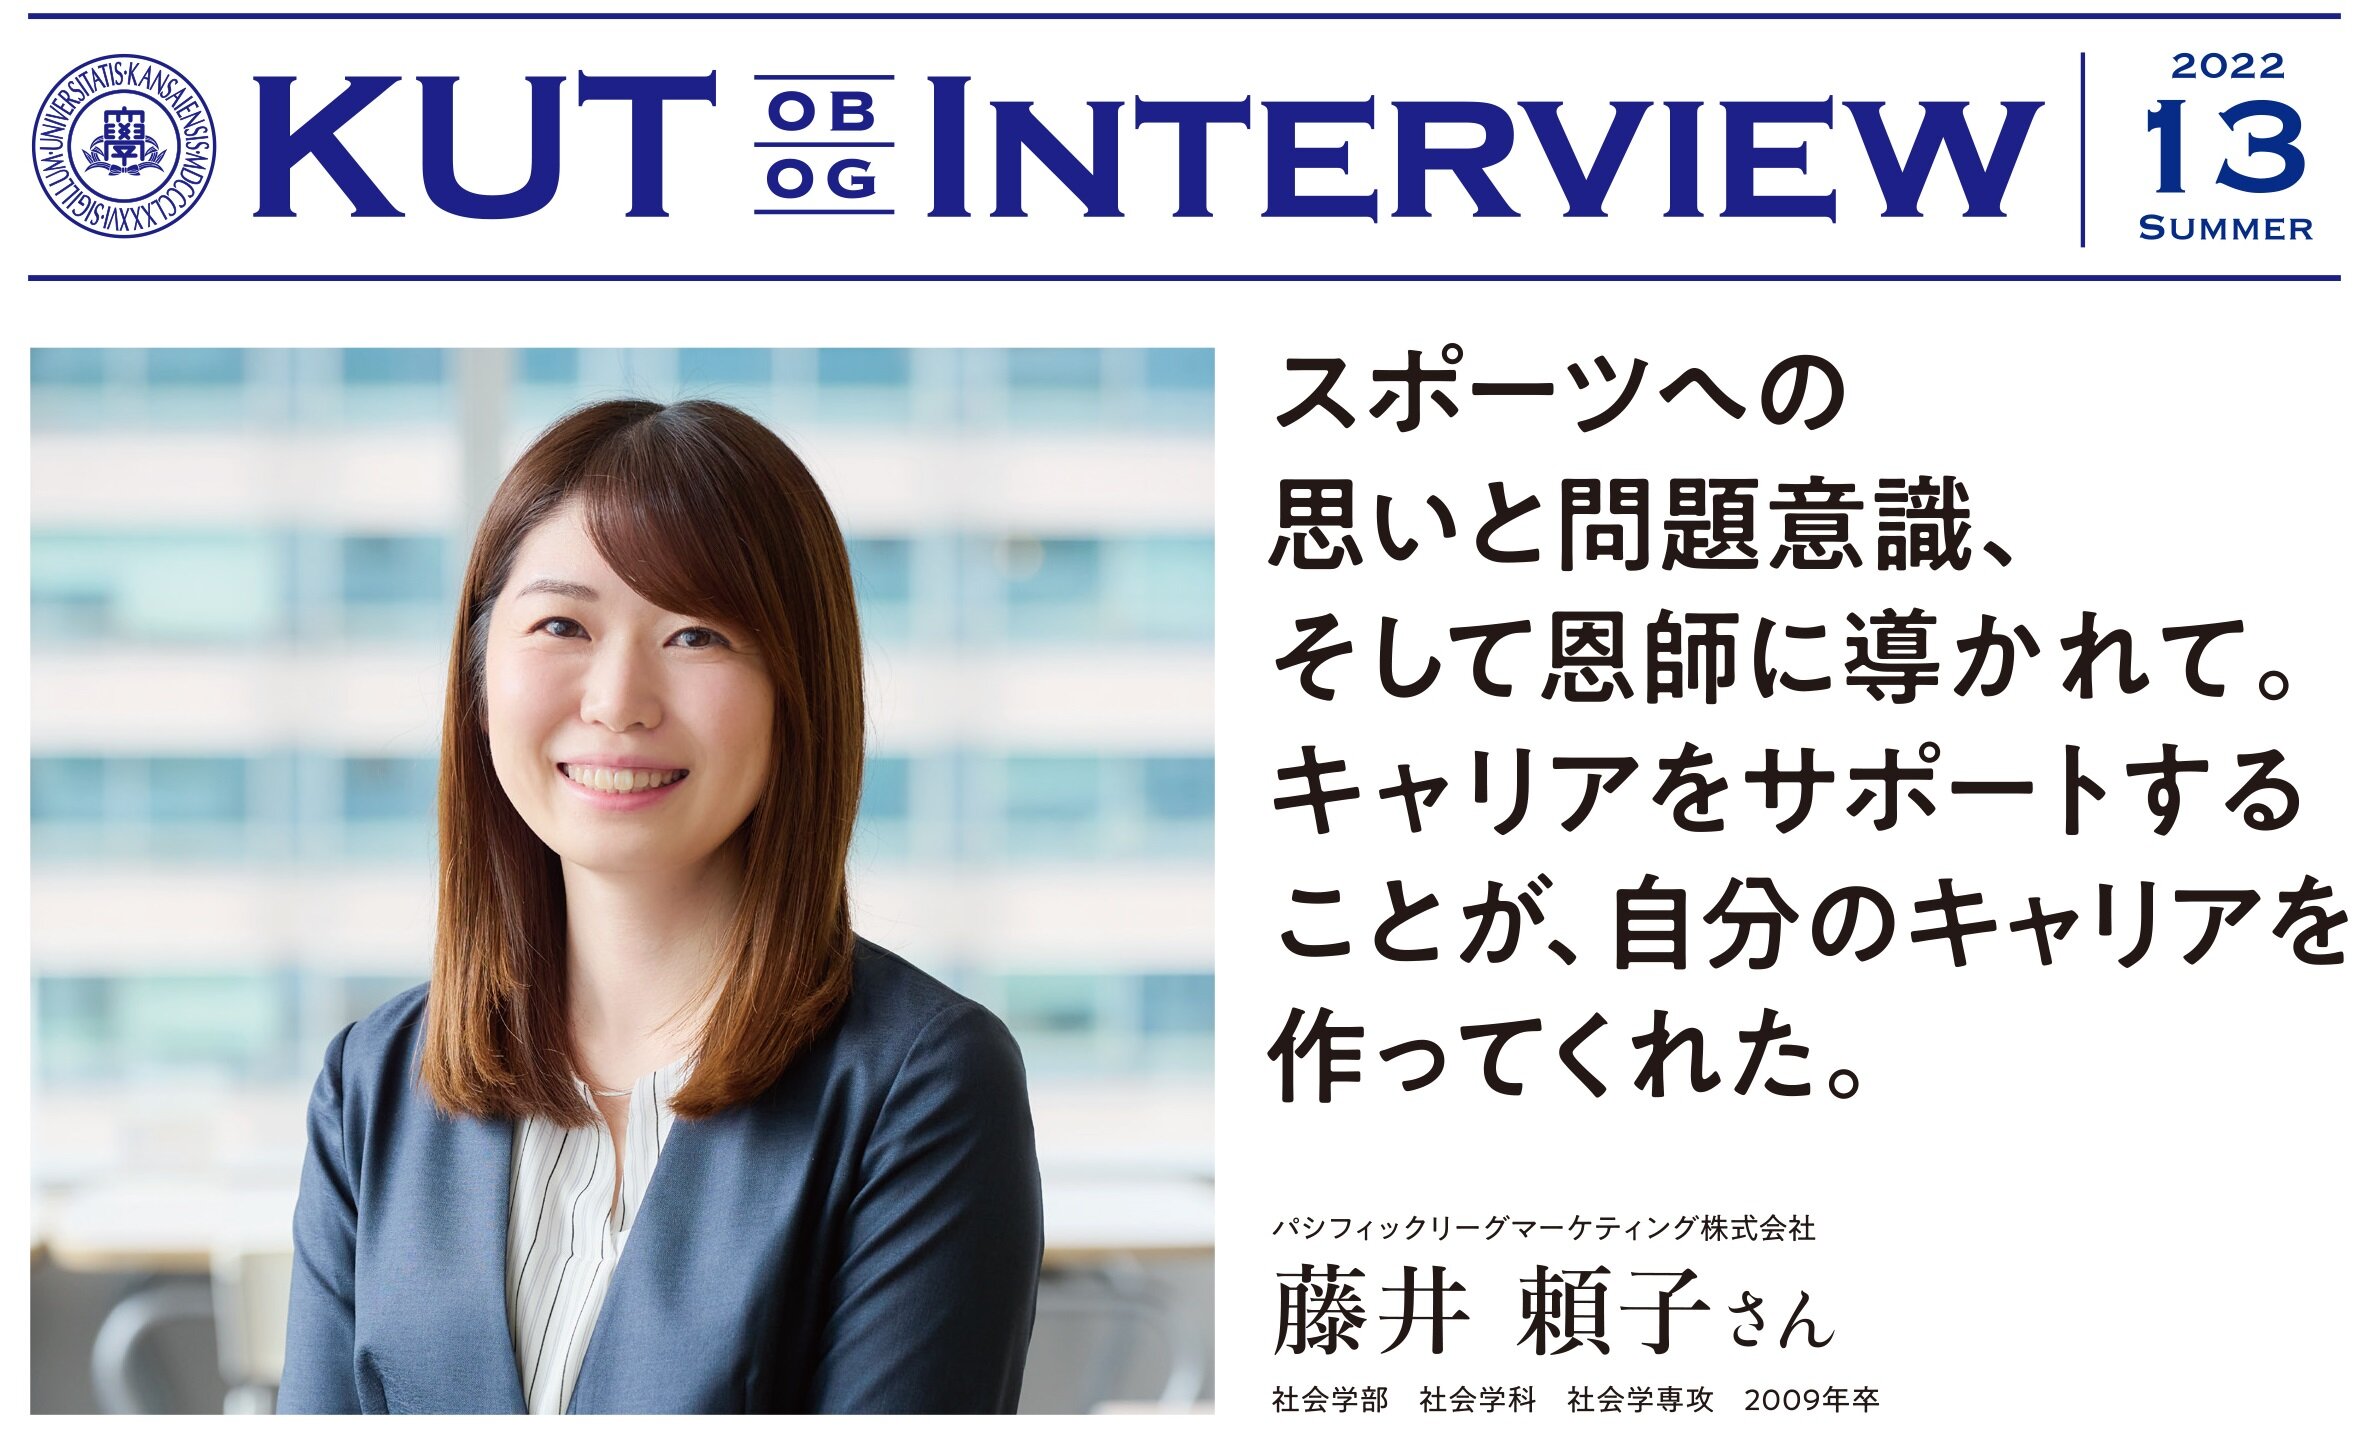 〈KUT INTERVIEW 第１３号〉首都圏で活躍する卒業生をご紹介します！